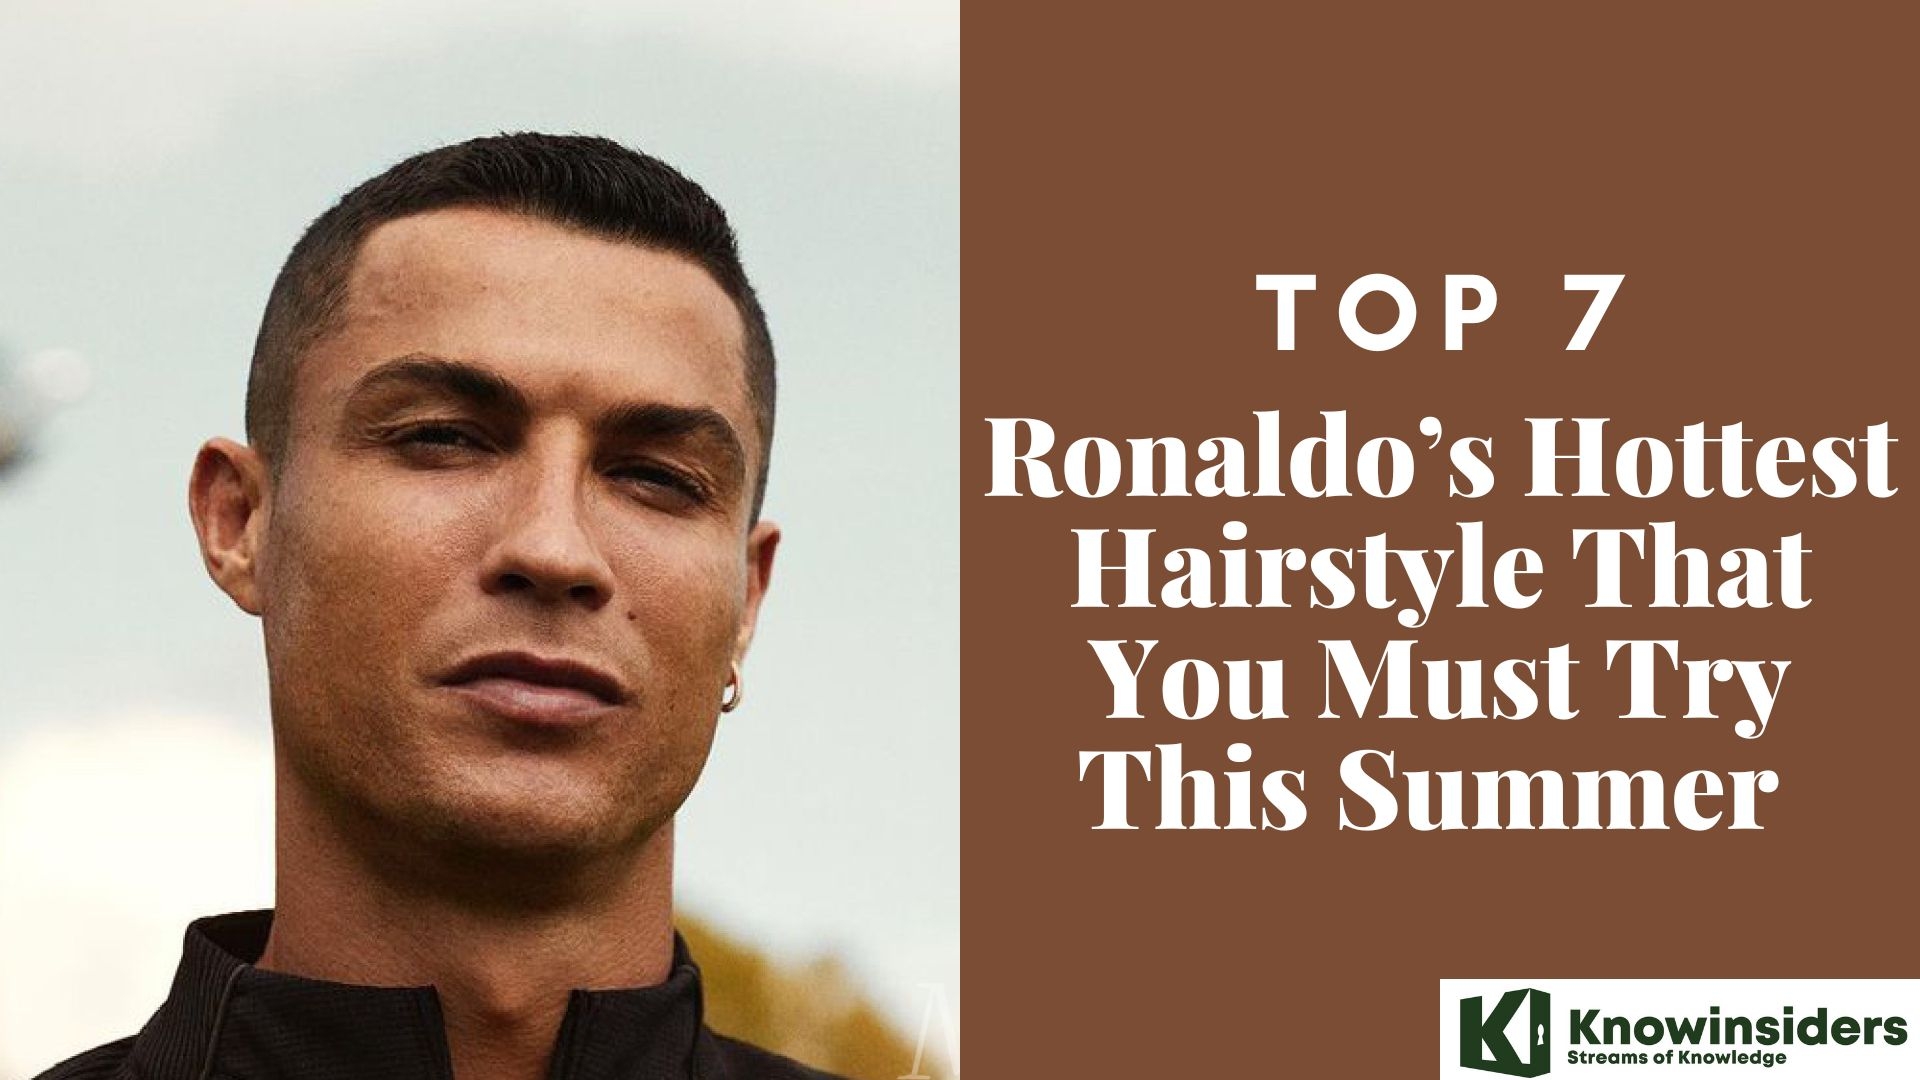 How to Style Top 7 Ronaldo’s Hottest Hairstyles